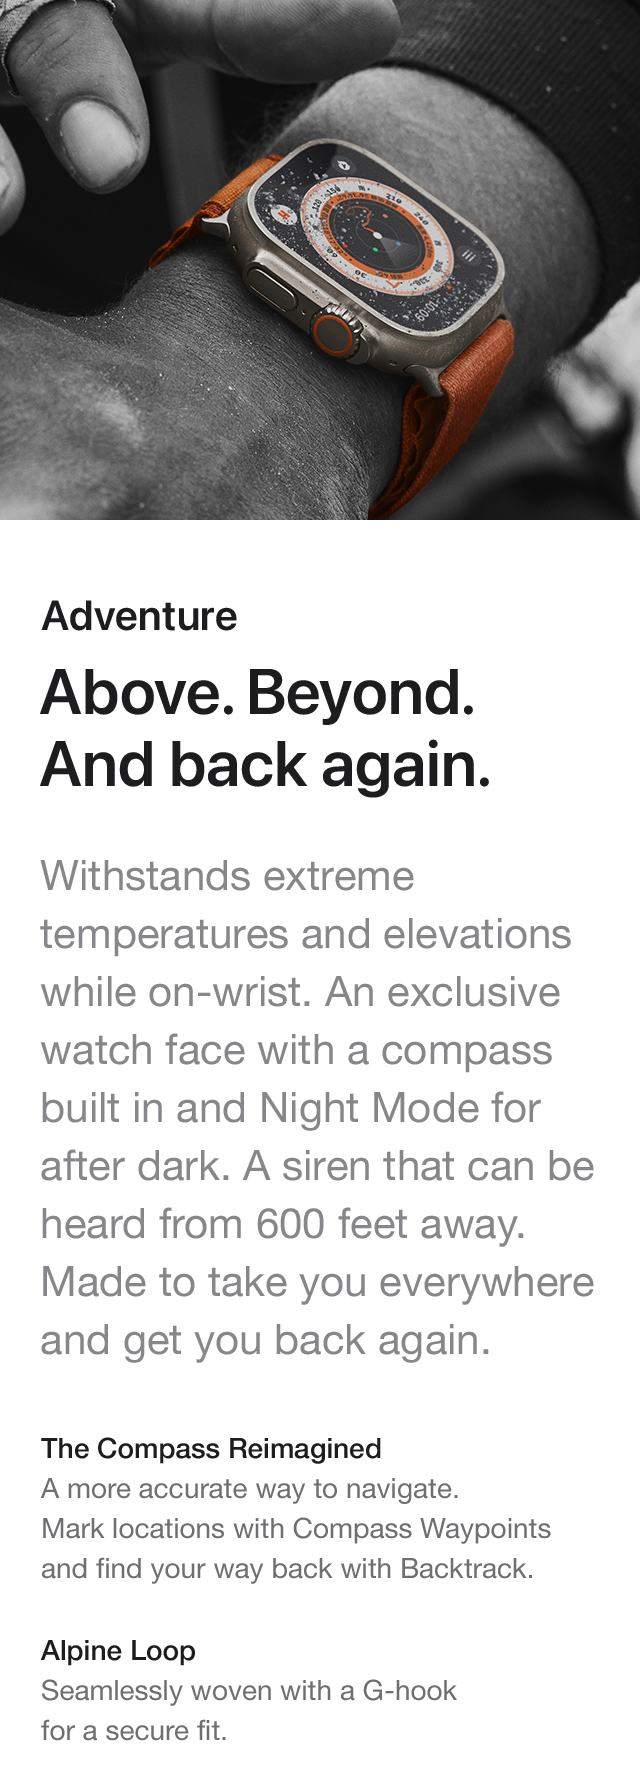 Adventure Above. Beyond. And back again. Withstands extreme temperatures and elevations while on-wrist. An exclusive watch face with a compass built in and Night Mode for after dark. A siren that can be heard from 600 feet away. Made to take you everywhere and get you back again. The Compass ReimaginedA more accurate way to navigate. Mark locations with Compass Waypoints and find your way back with Backtrack. Alpine Loop Seamlessly woven with a G-hook for a secure fit.